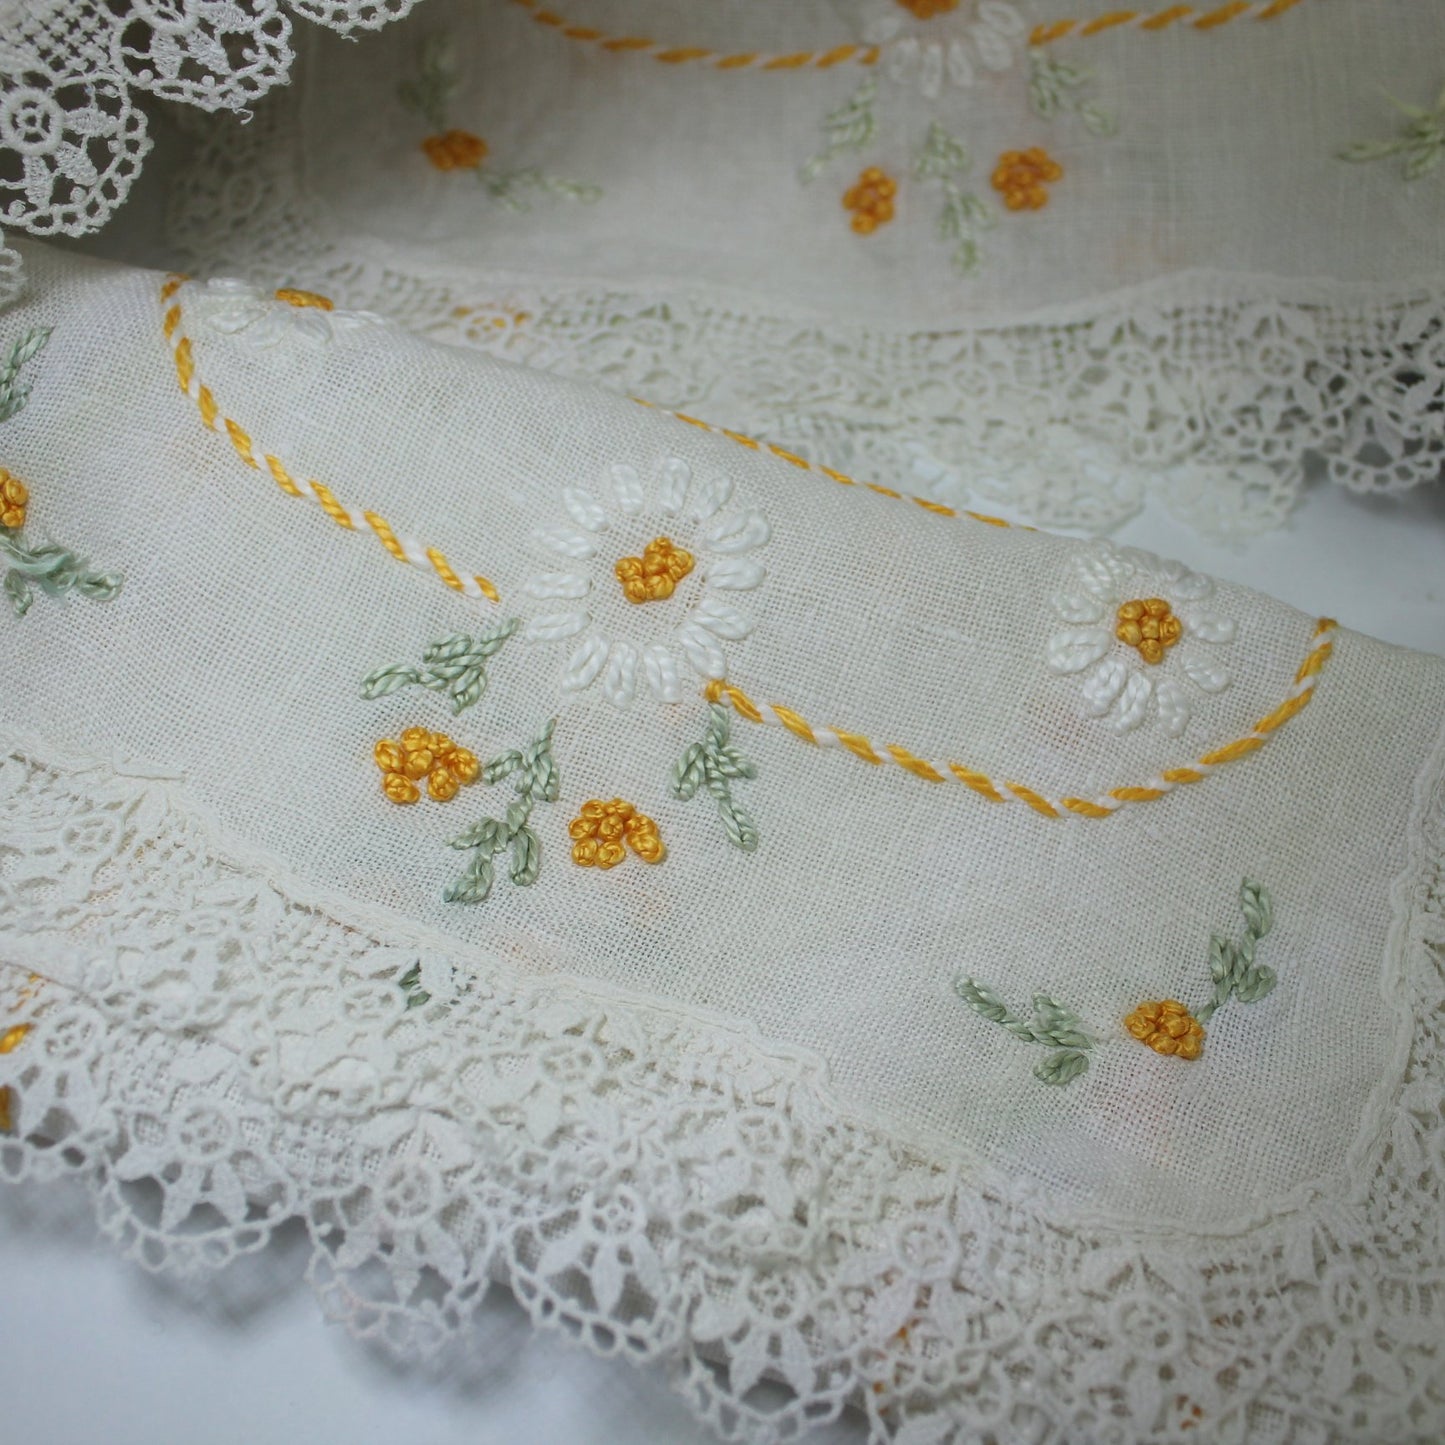 Collection 4 Embroidered Fine Linen Table Pieces White with Daisies Lace Elegant Vintage exquisitely embroidered